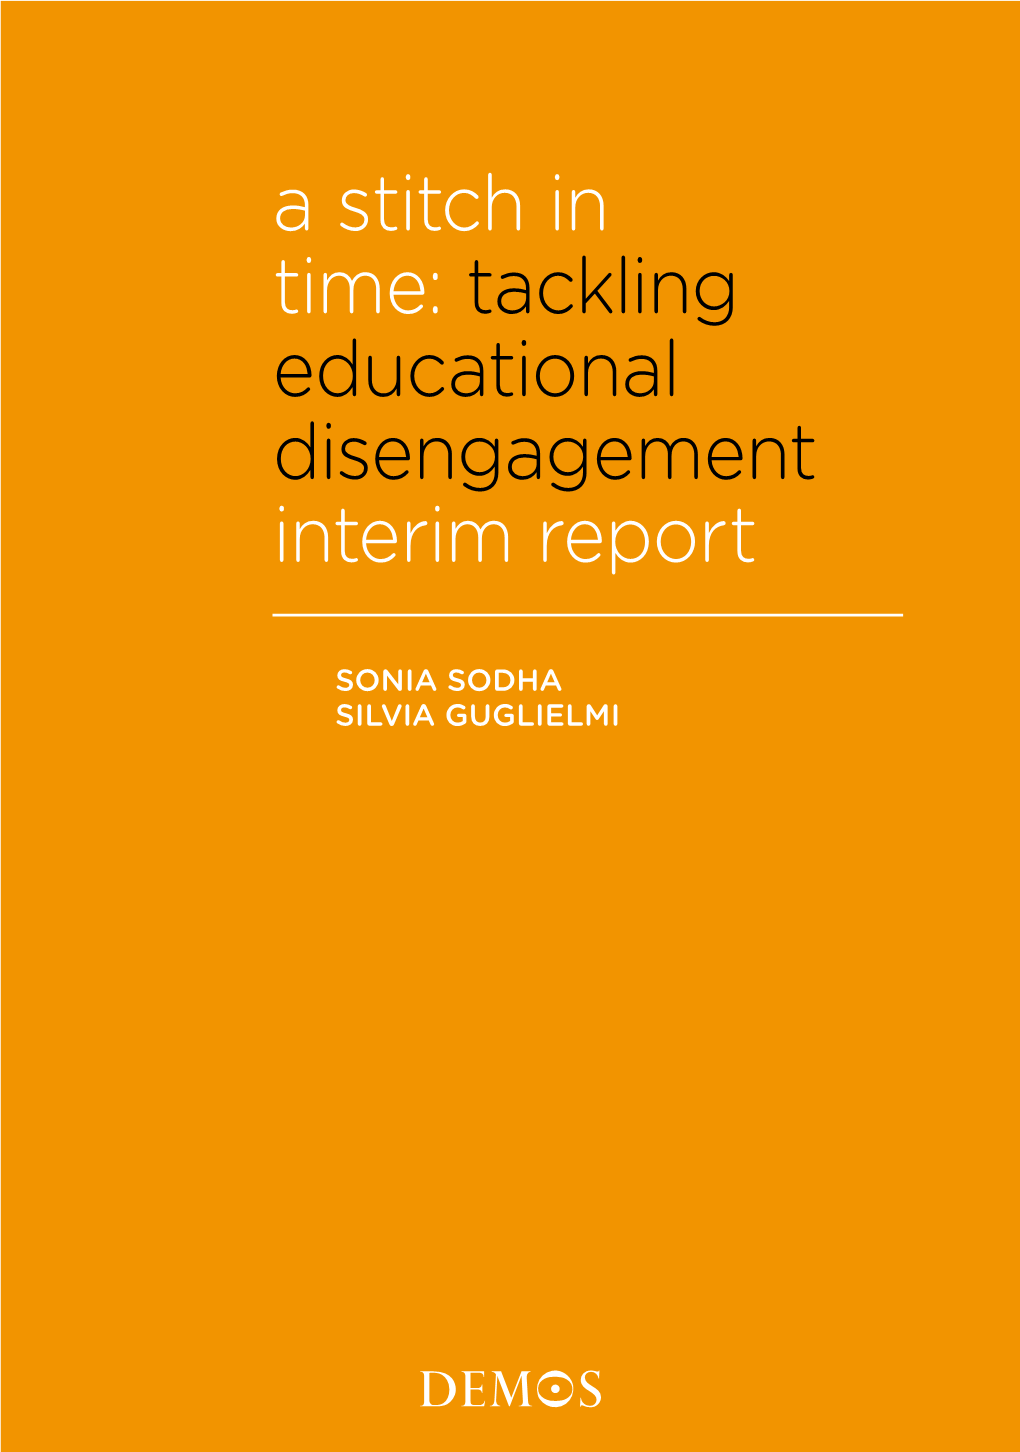 A Stitch in Time: Tackling Educational Disengagement Interim Report